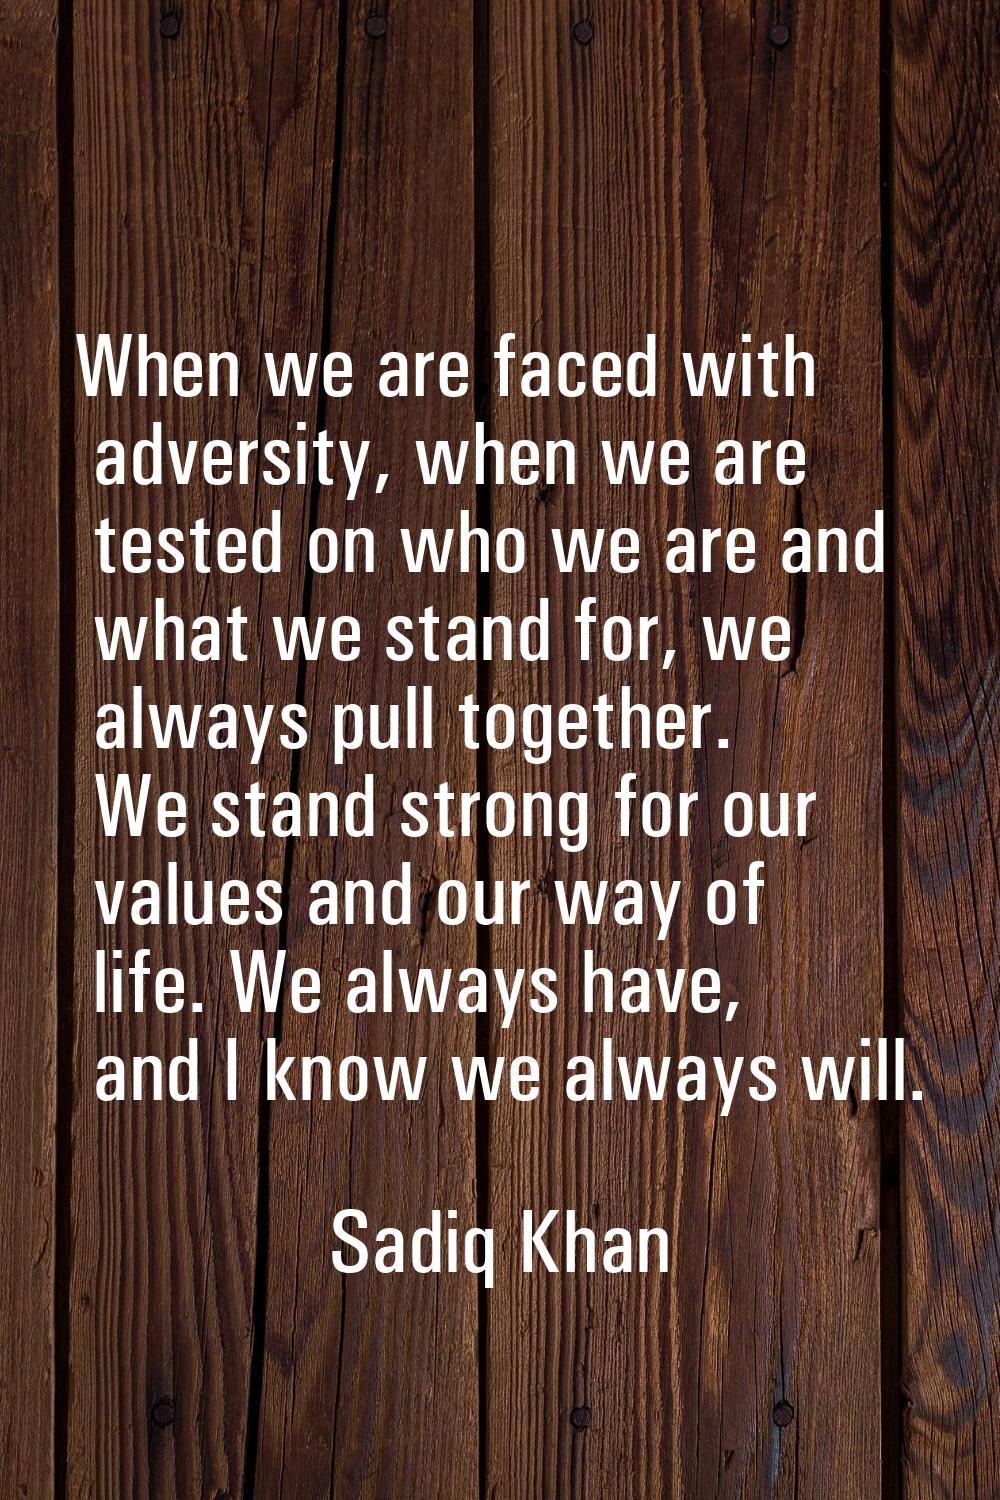 When we are faced with adversity, when we are tested on who we are and what we stand for, we always